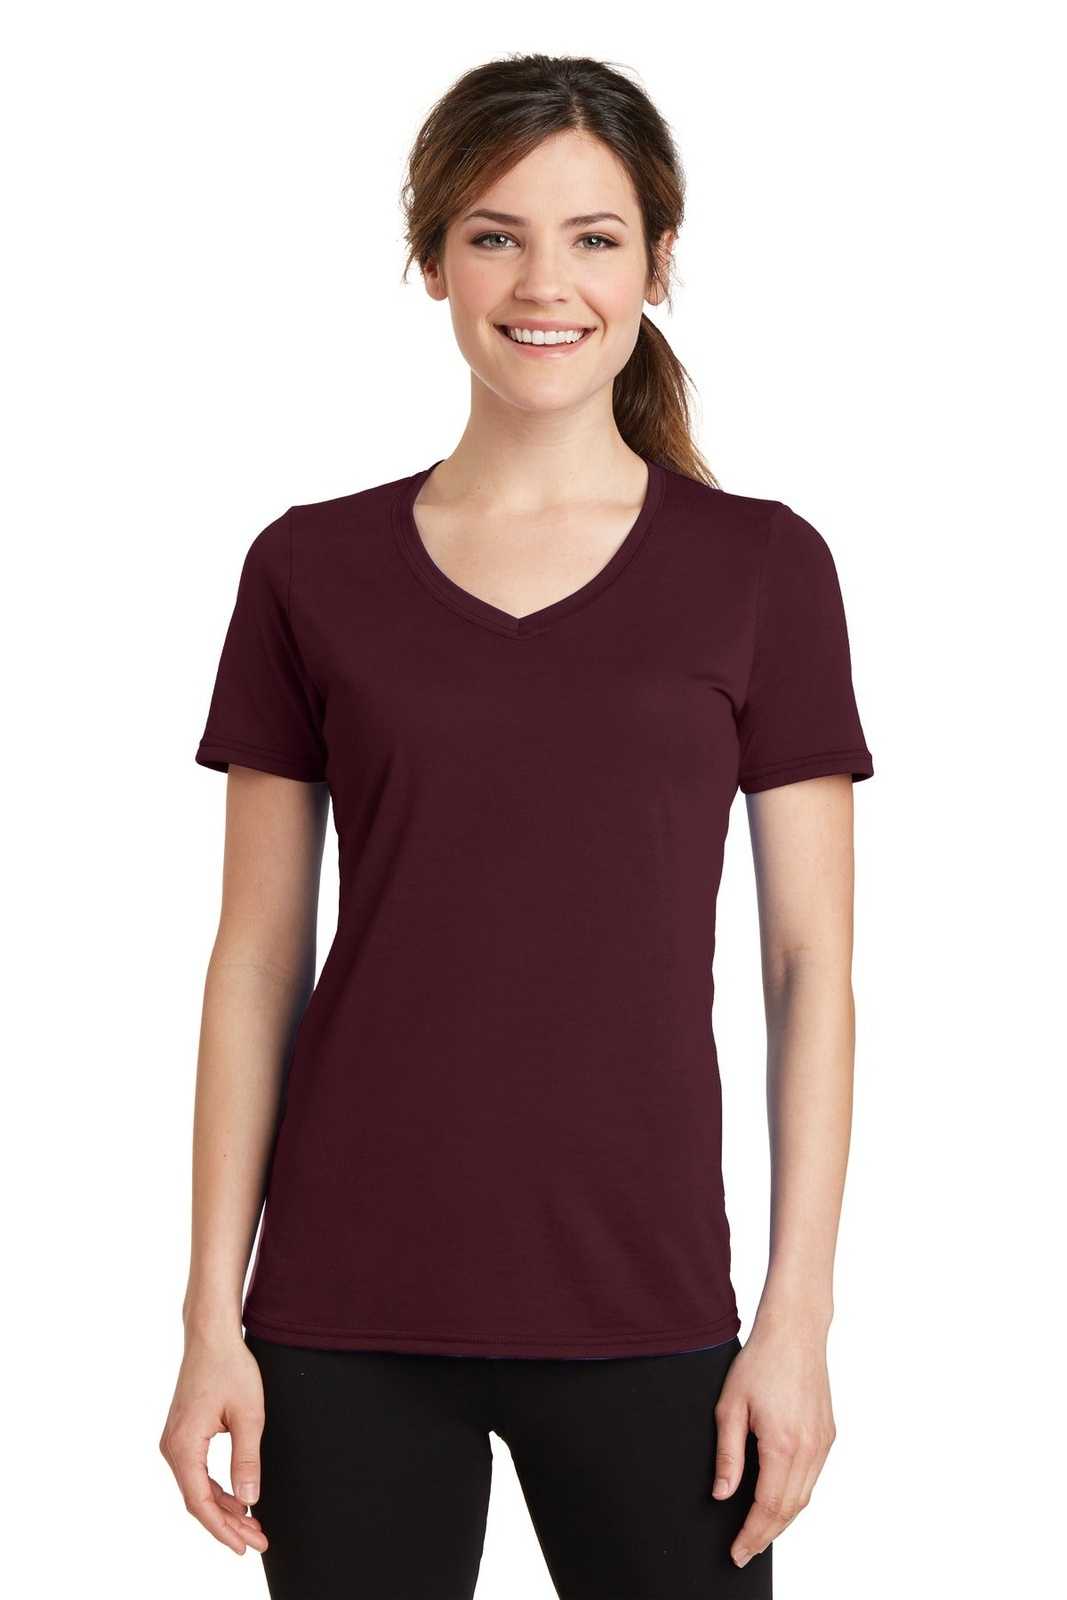 Port & Company LPC381V Ladies Performance Blend V-Neck Tee - Athletic Maroon - HIT a Double - 1